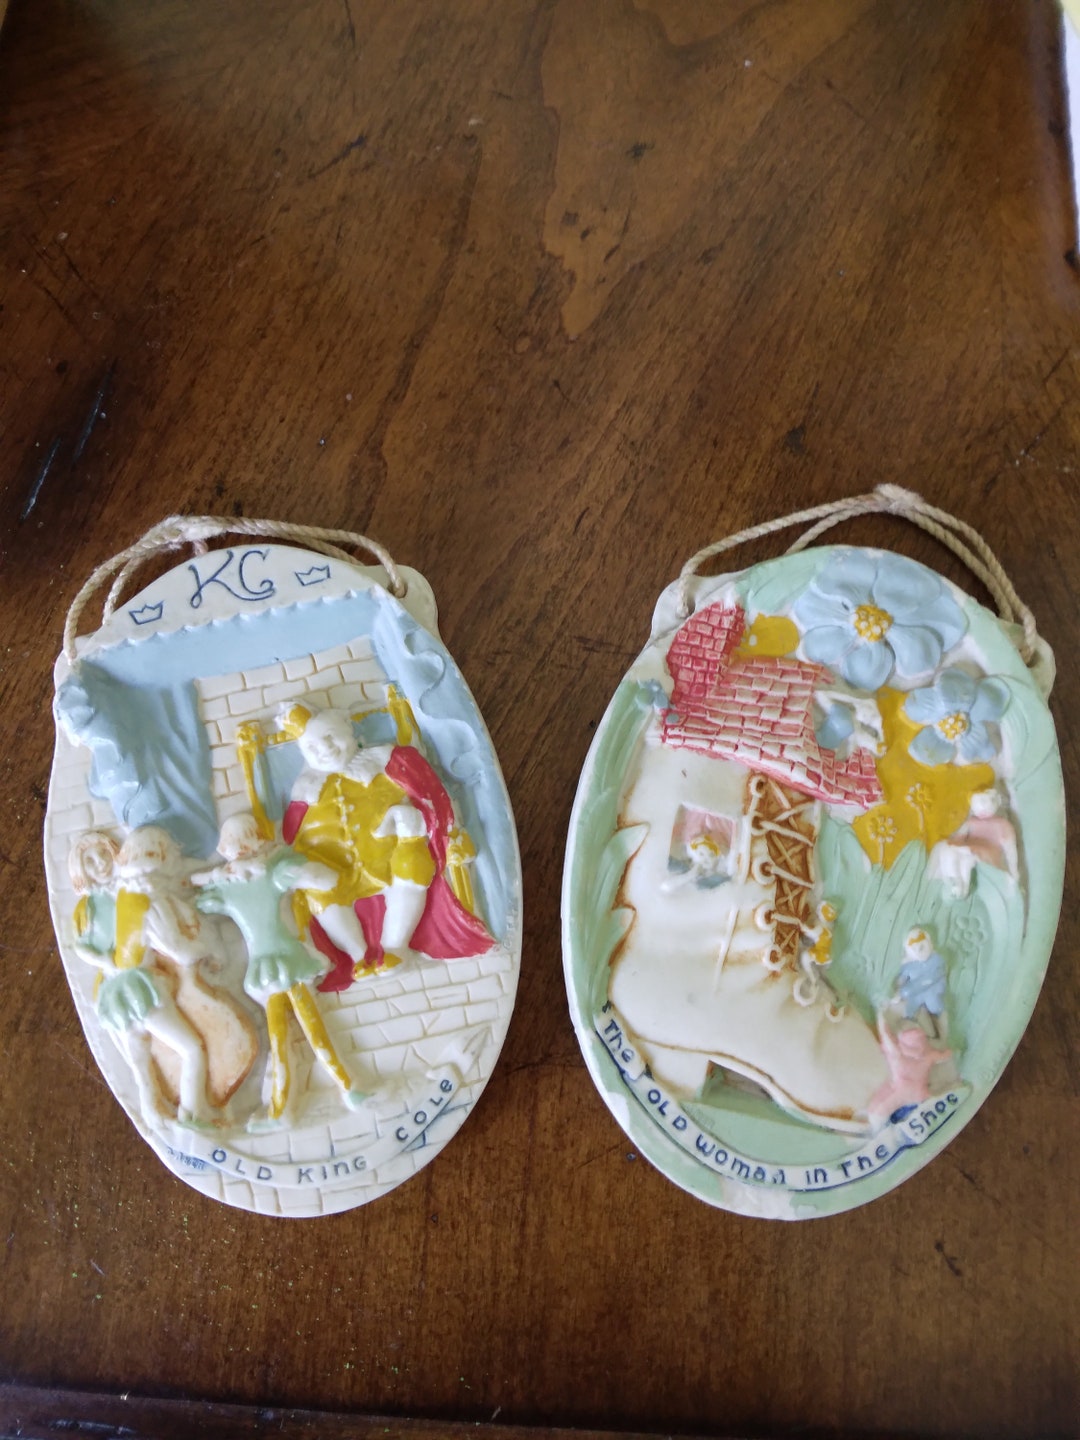 SALE 2 Bouterware Plaques the Old Woman in the Shoe and Old - Etsy